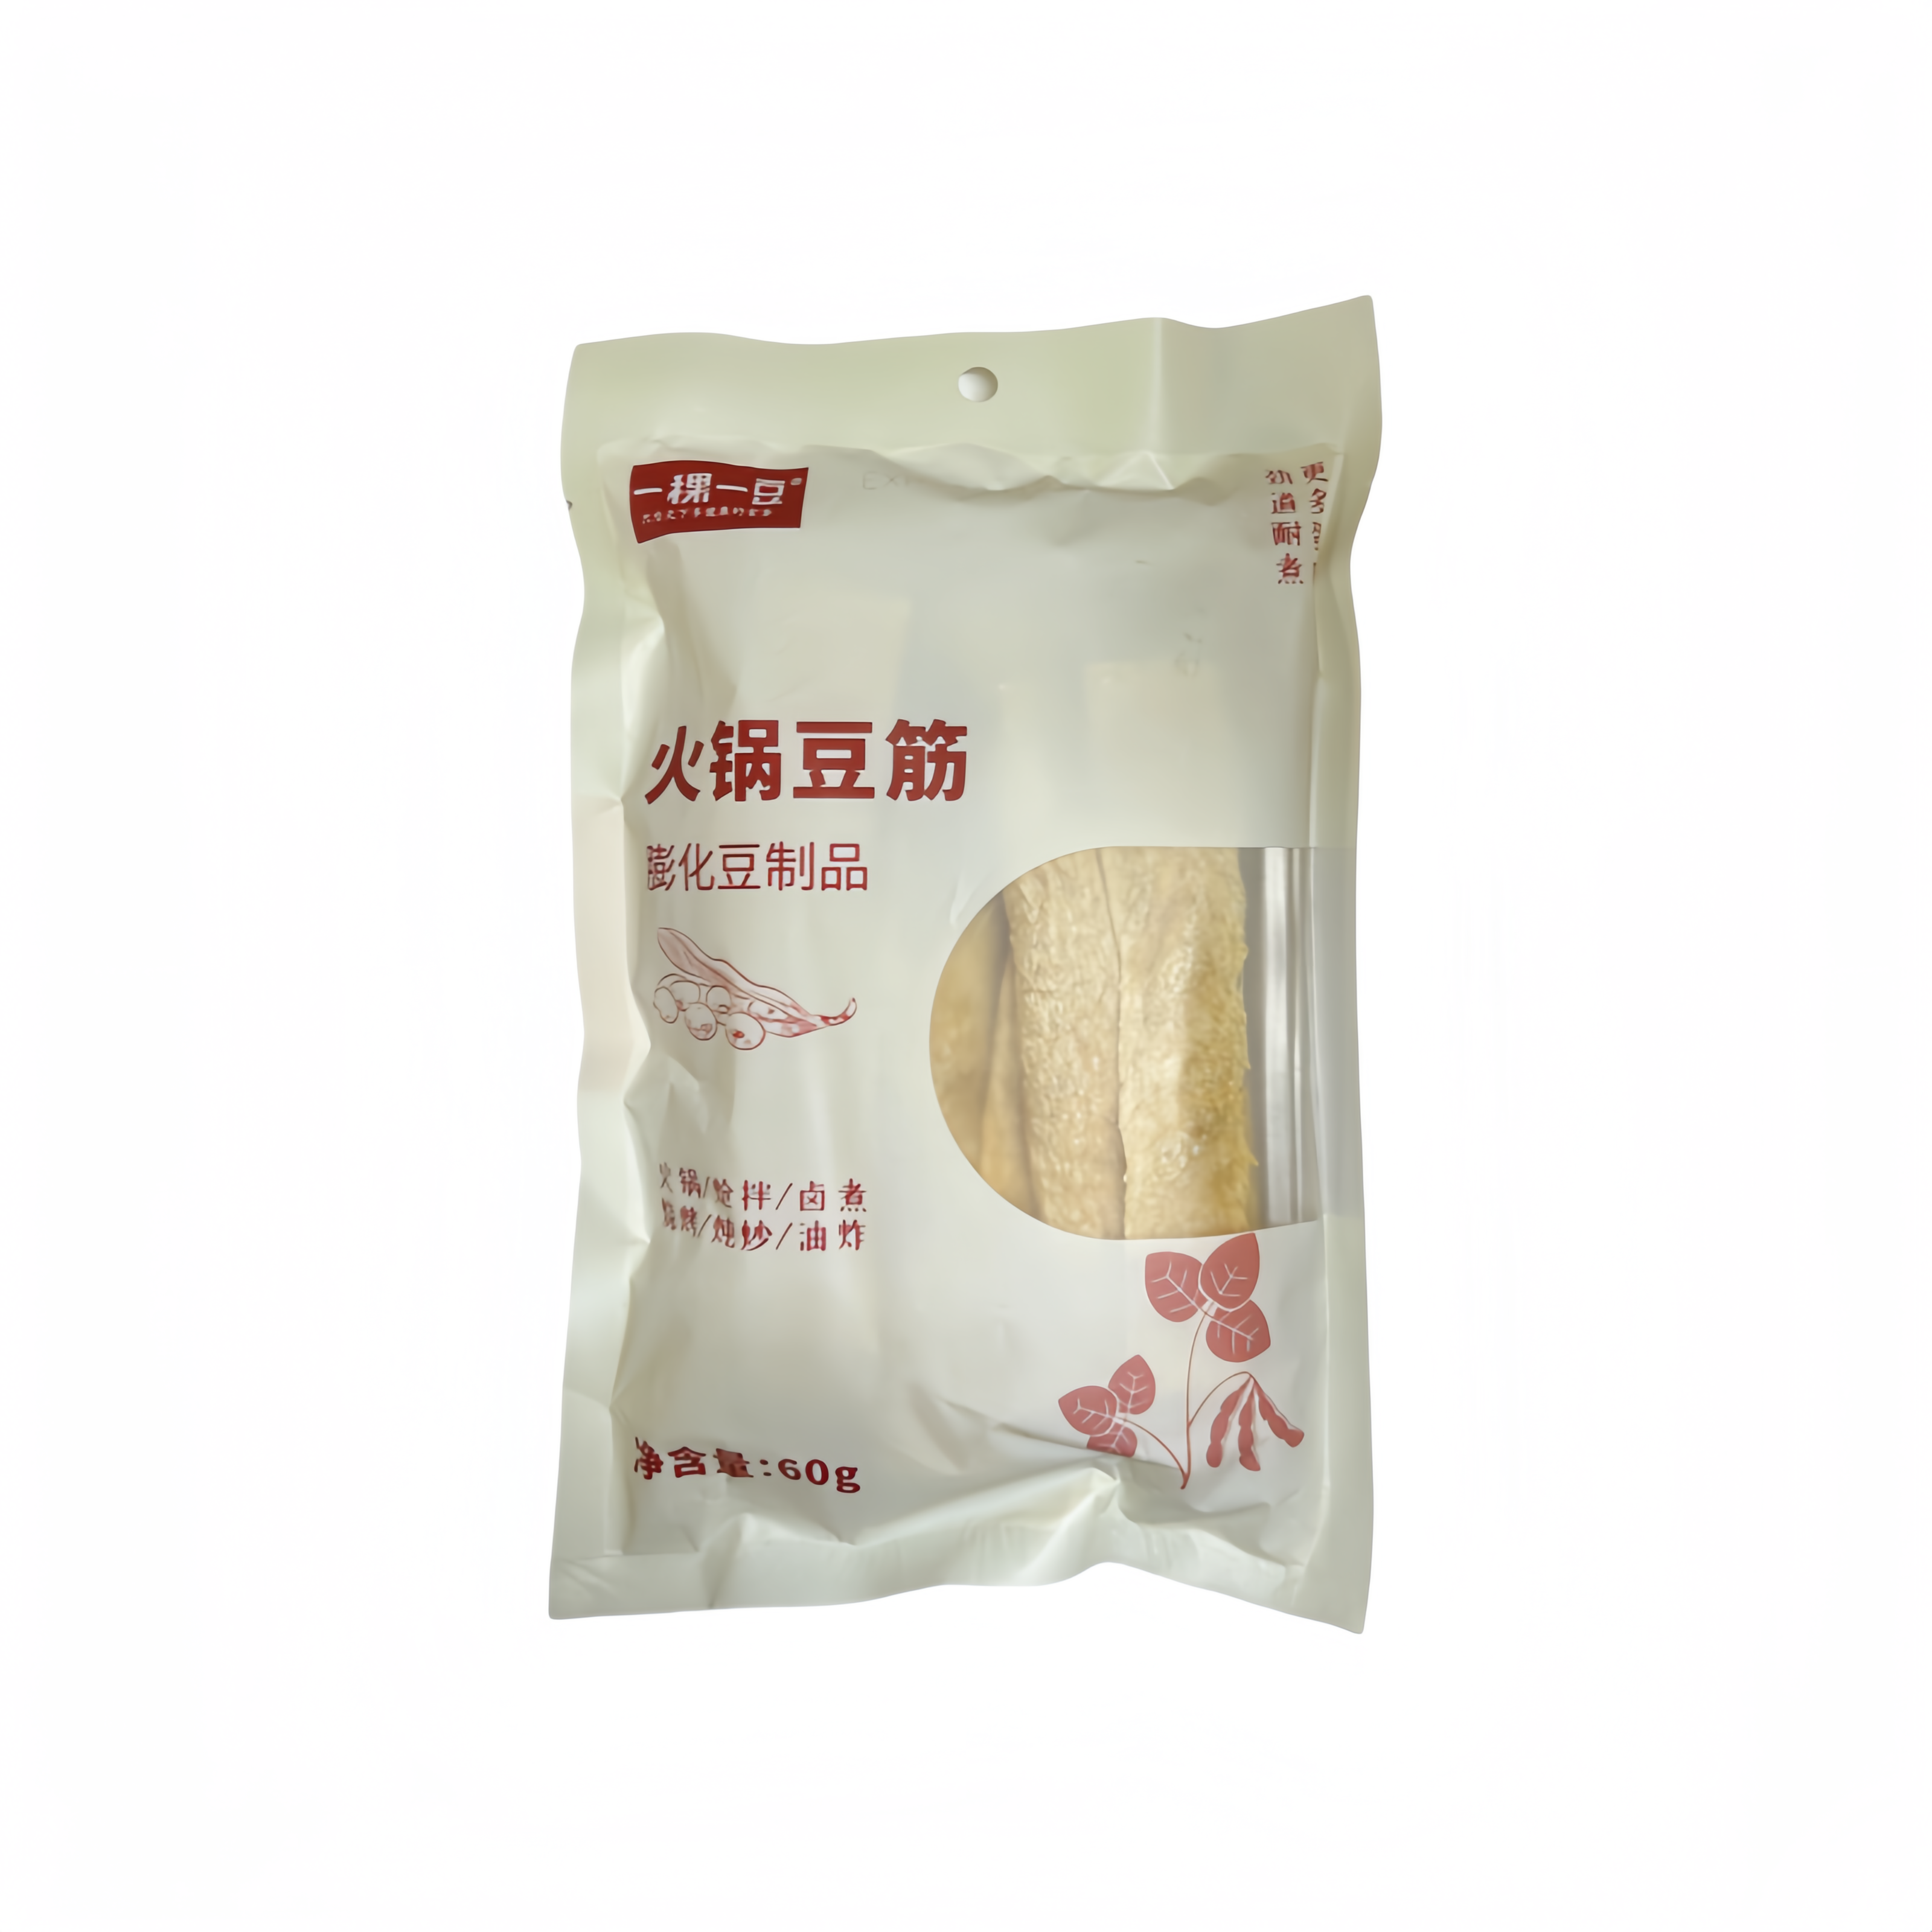 Bean Curd For Hotpot 60g YKYD China